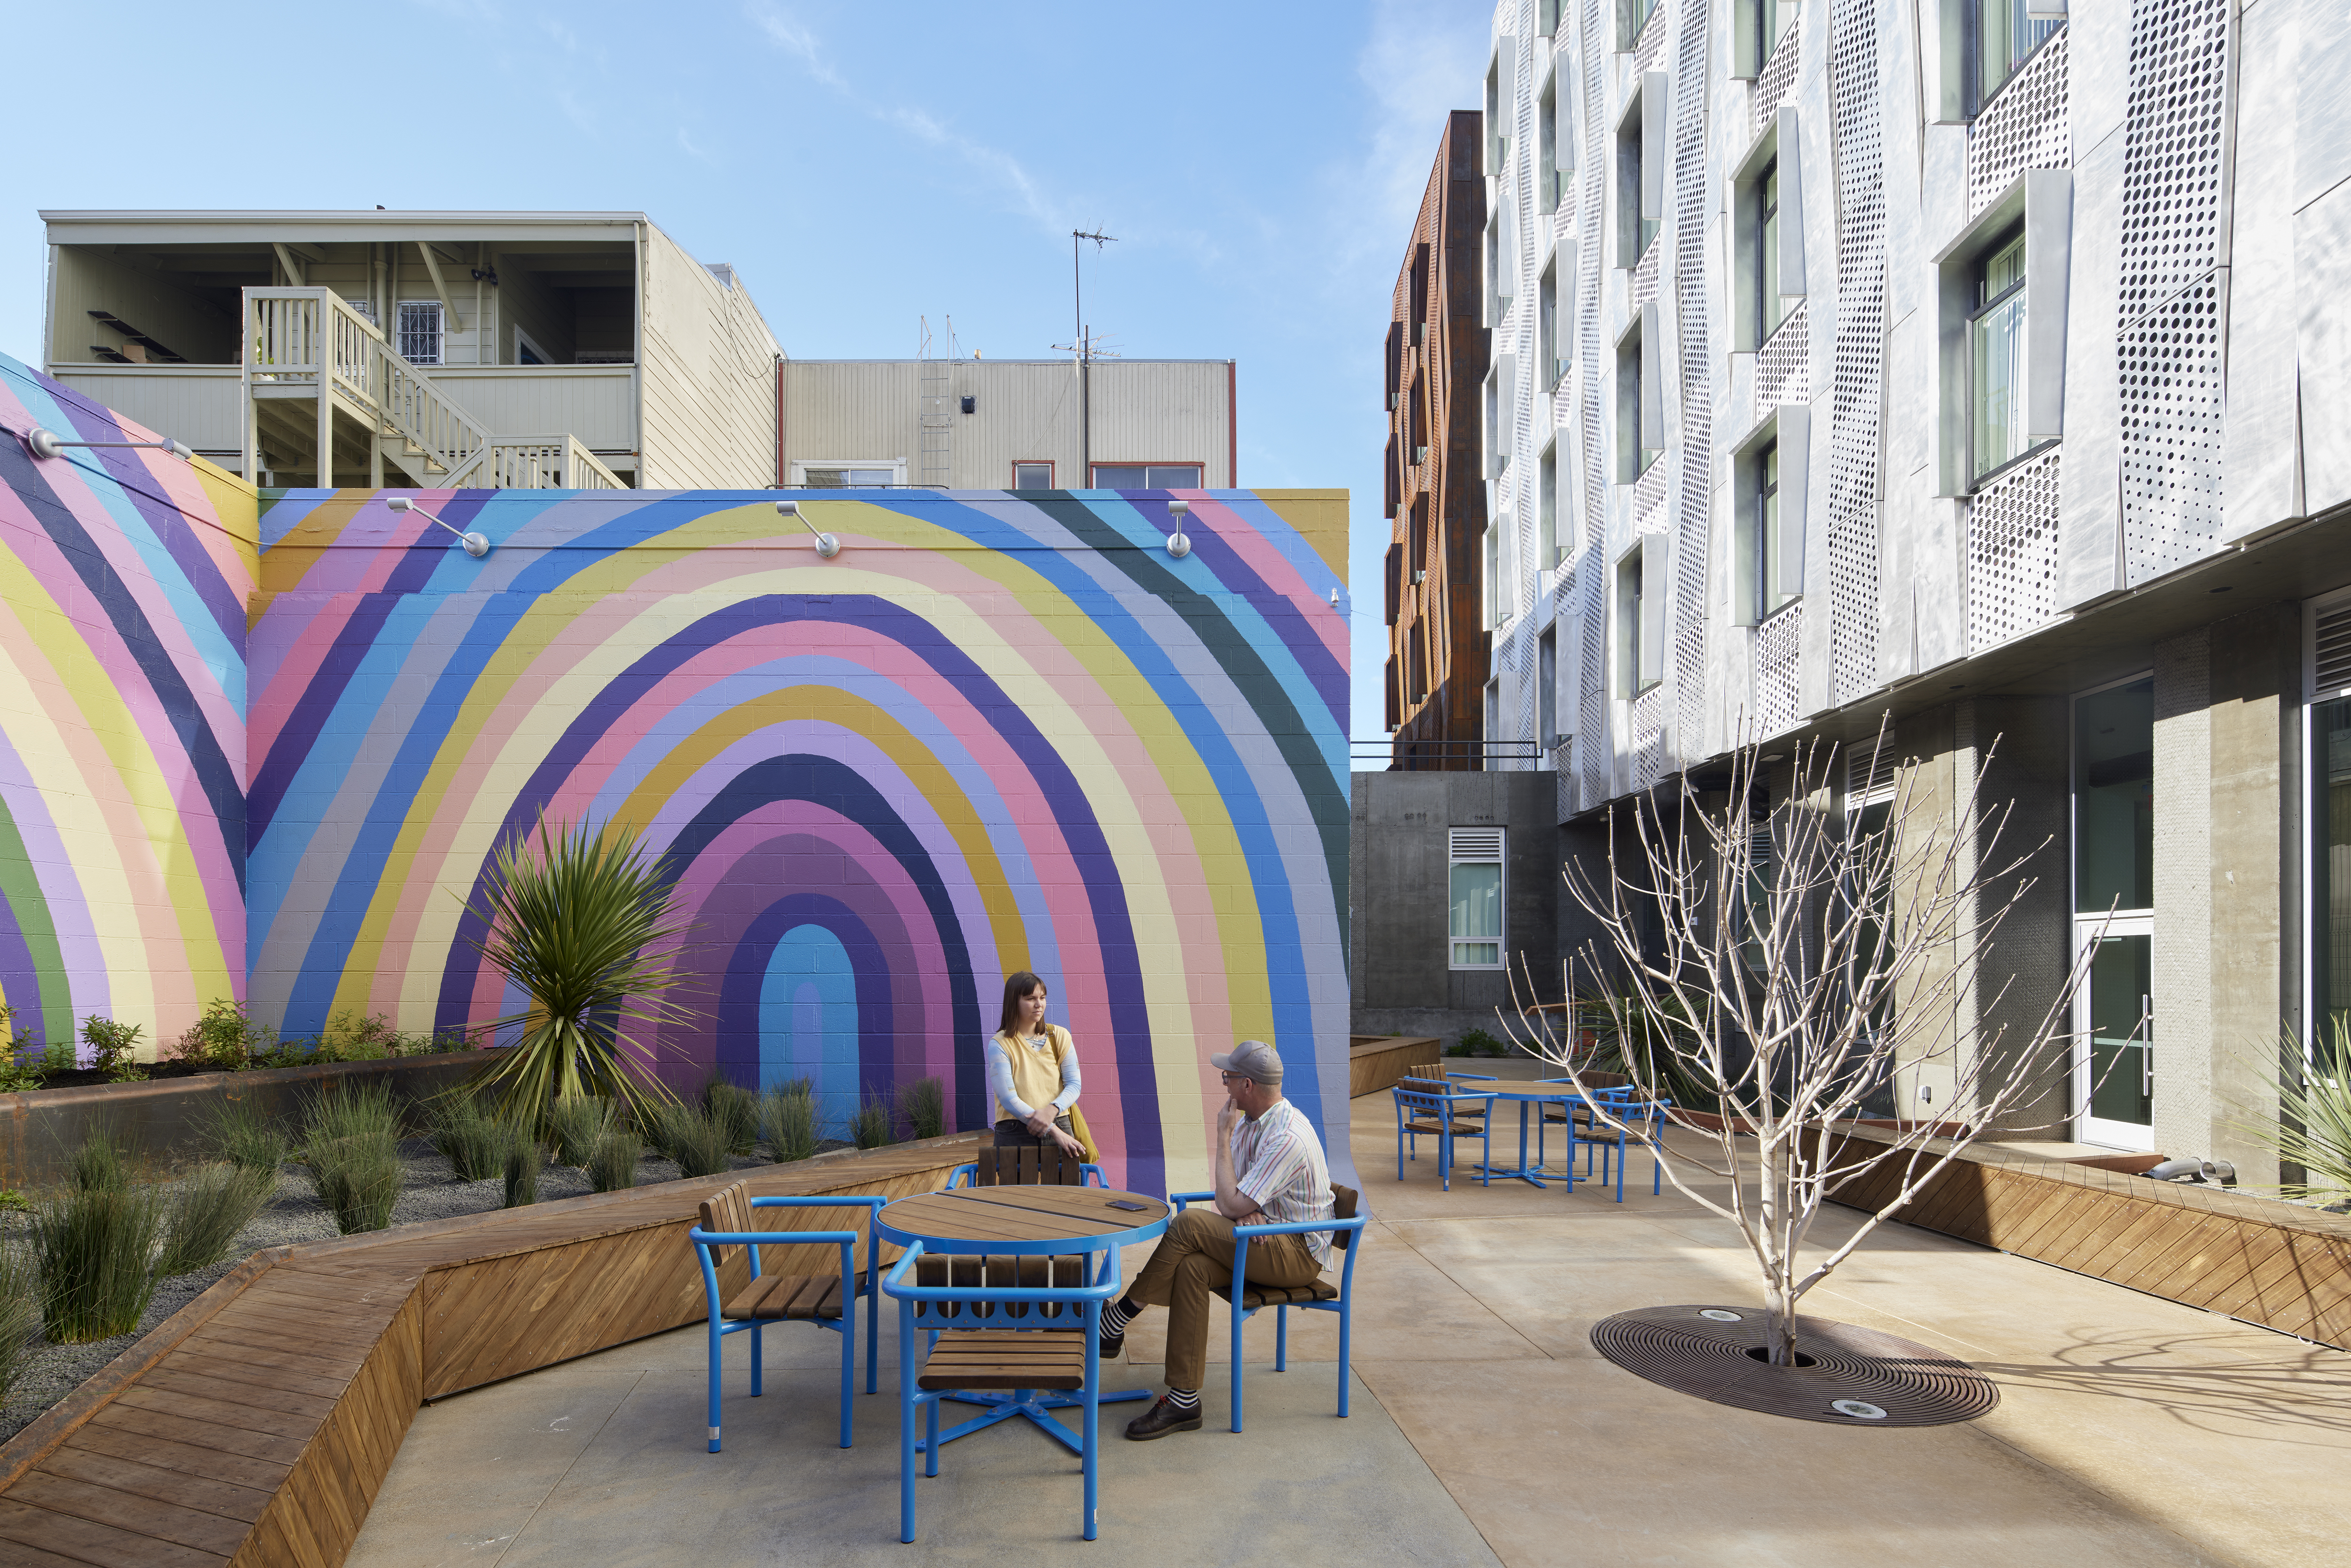 Residential courtyard inside Tahanan Supportive Housing in San Francisco.